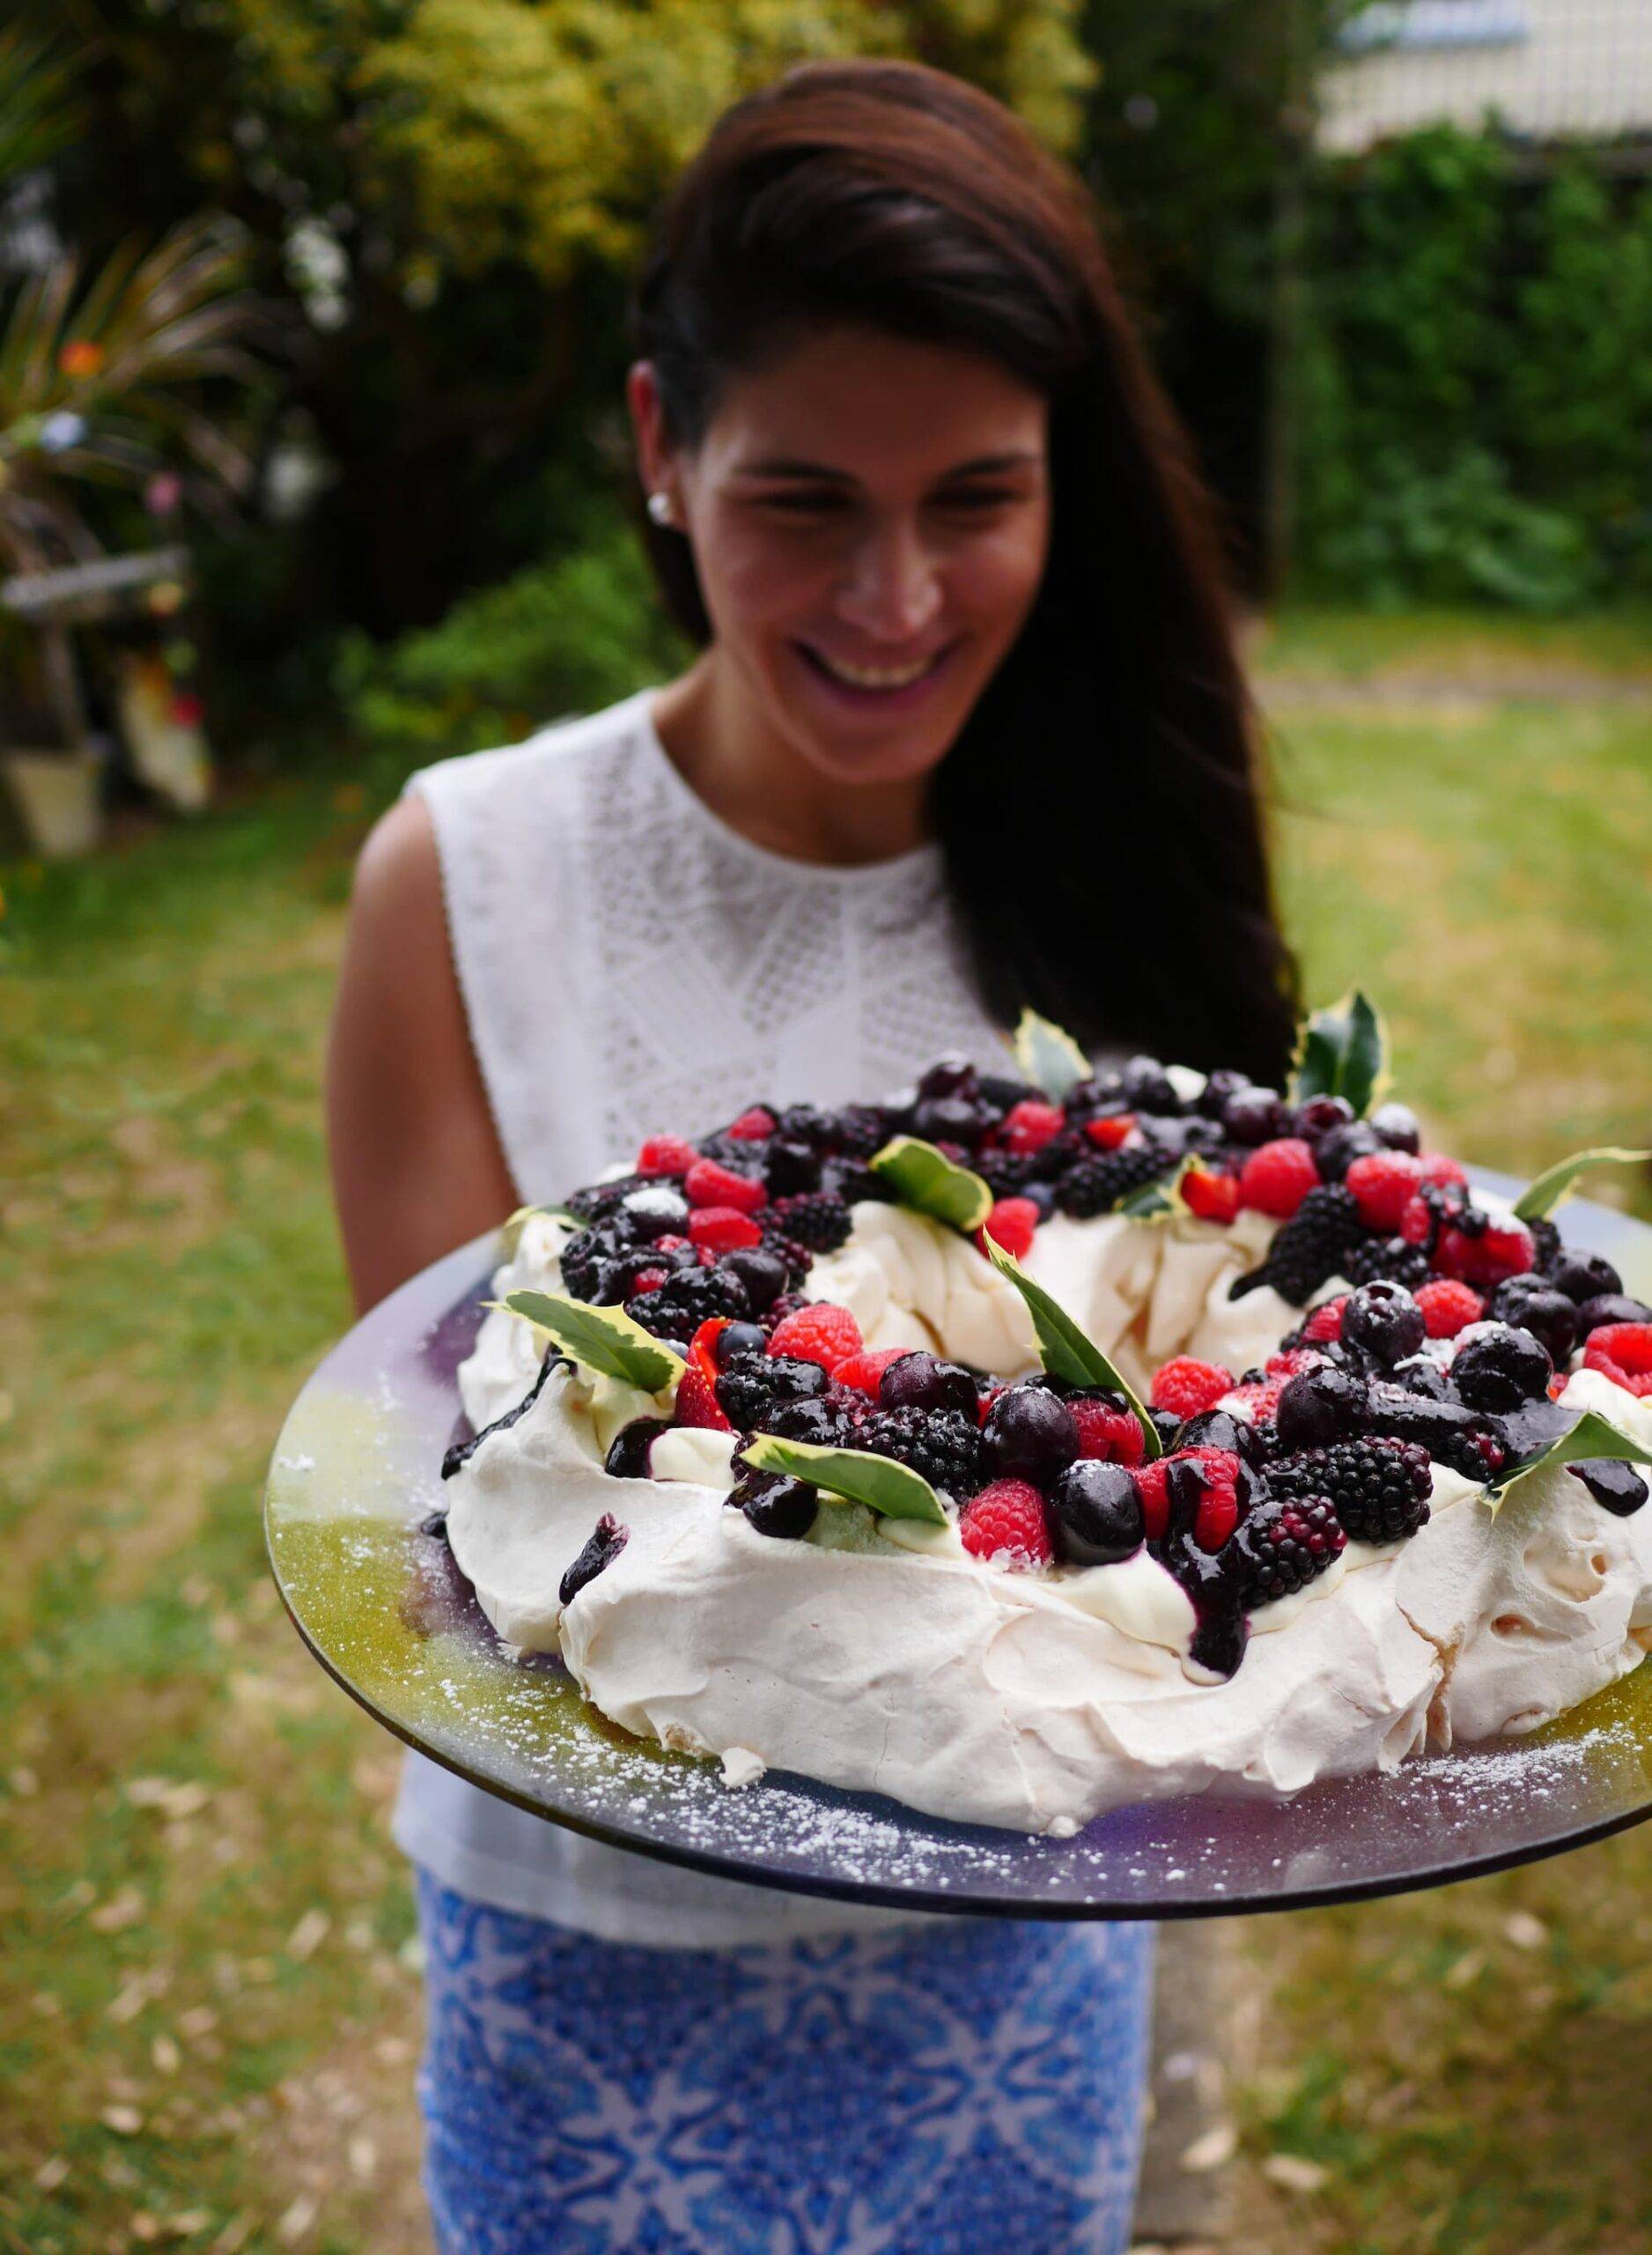 A slender, healthy woman holding a huge pavlova cake. The meringue cake is topped with fresh berries, whipped cream and holly leaves. The photo was made at christmas, which is the middle of summer in New Zealand.